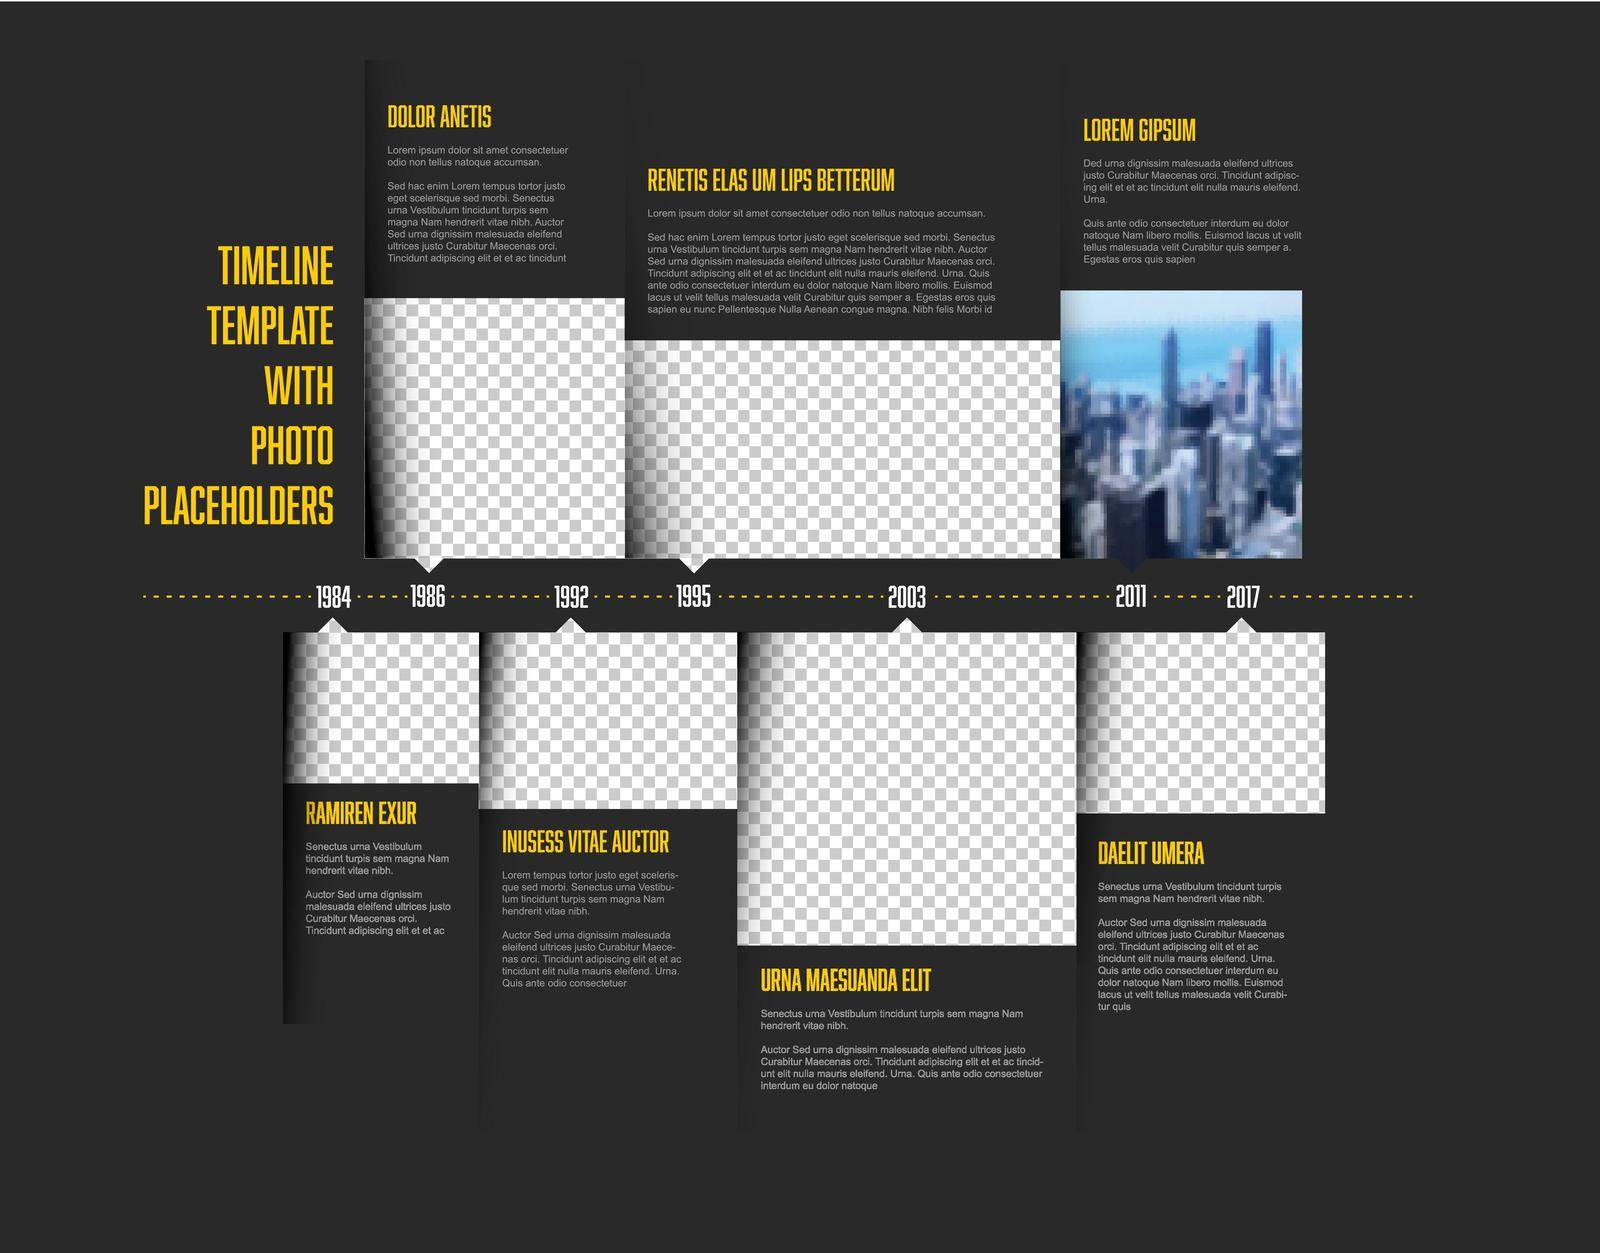 Vector simple dark infographic time line template with rectangle photo placeholders and yellow accent. Business company timeline overview profile with photos and text blocks. Multipurpose photo timeline infograph or infochart.